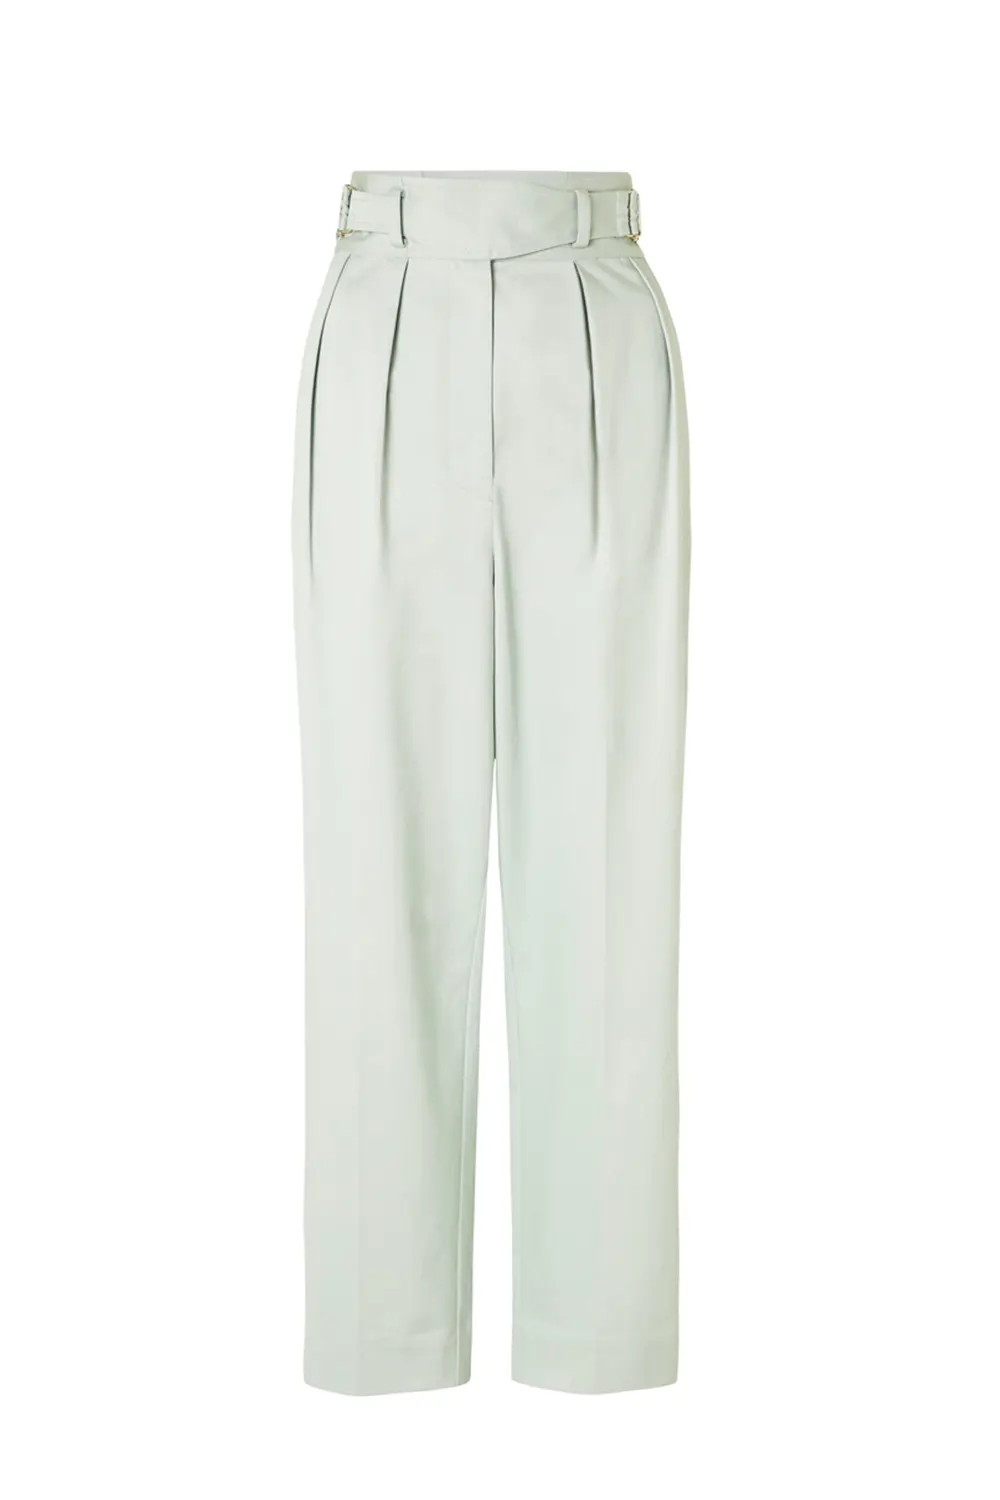 Oroton Buckle Pleat Front Pant in Mint